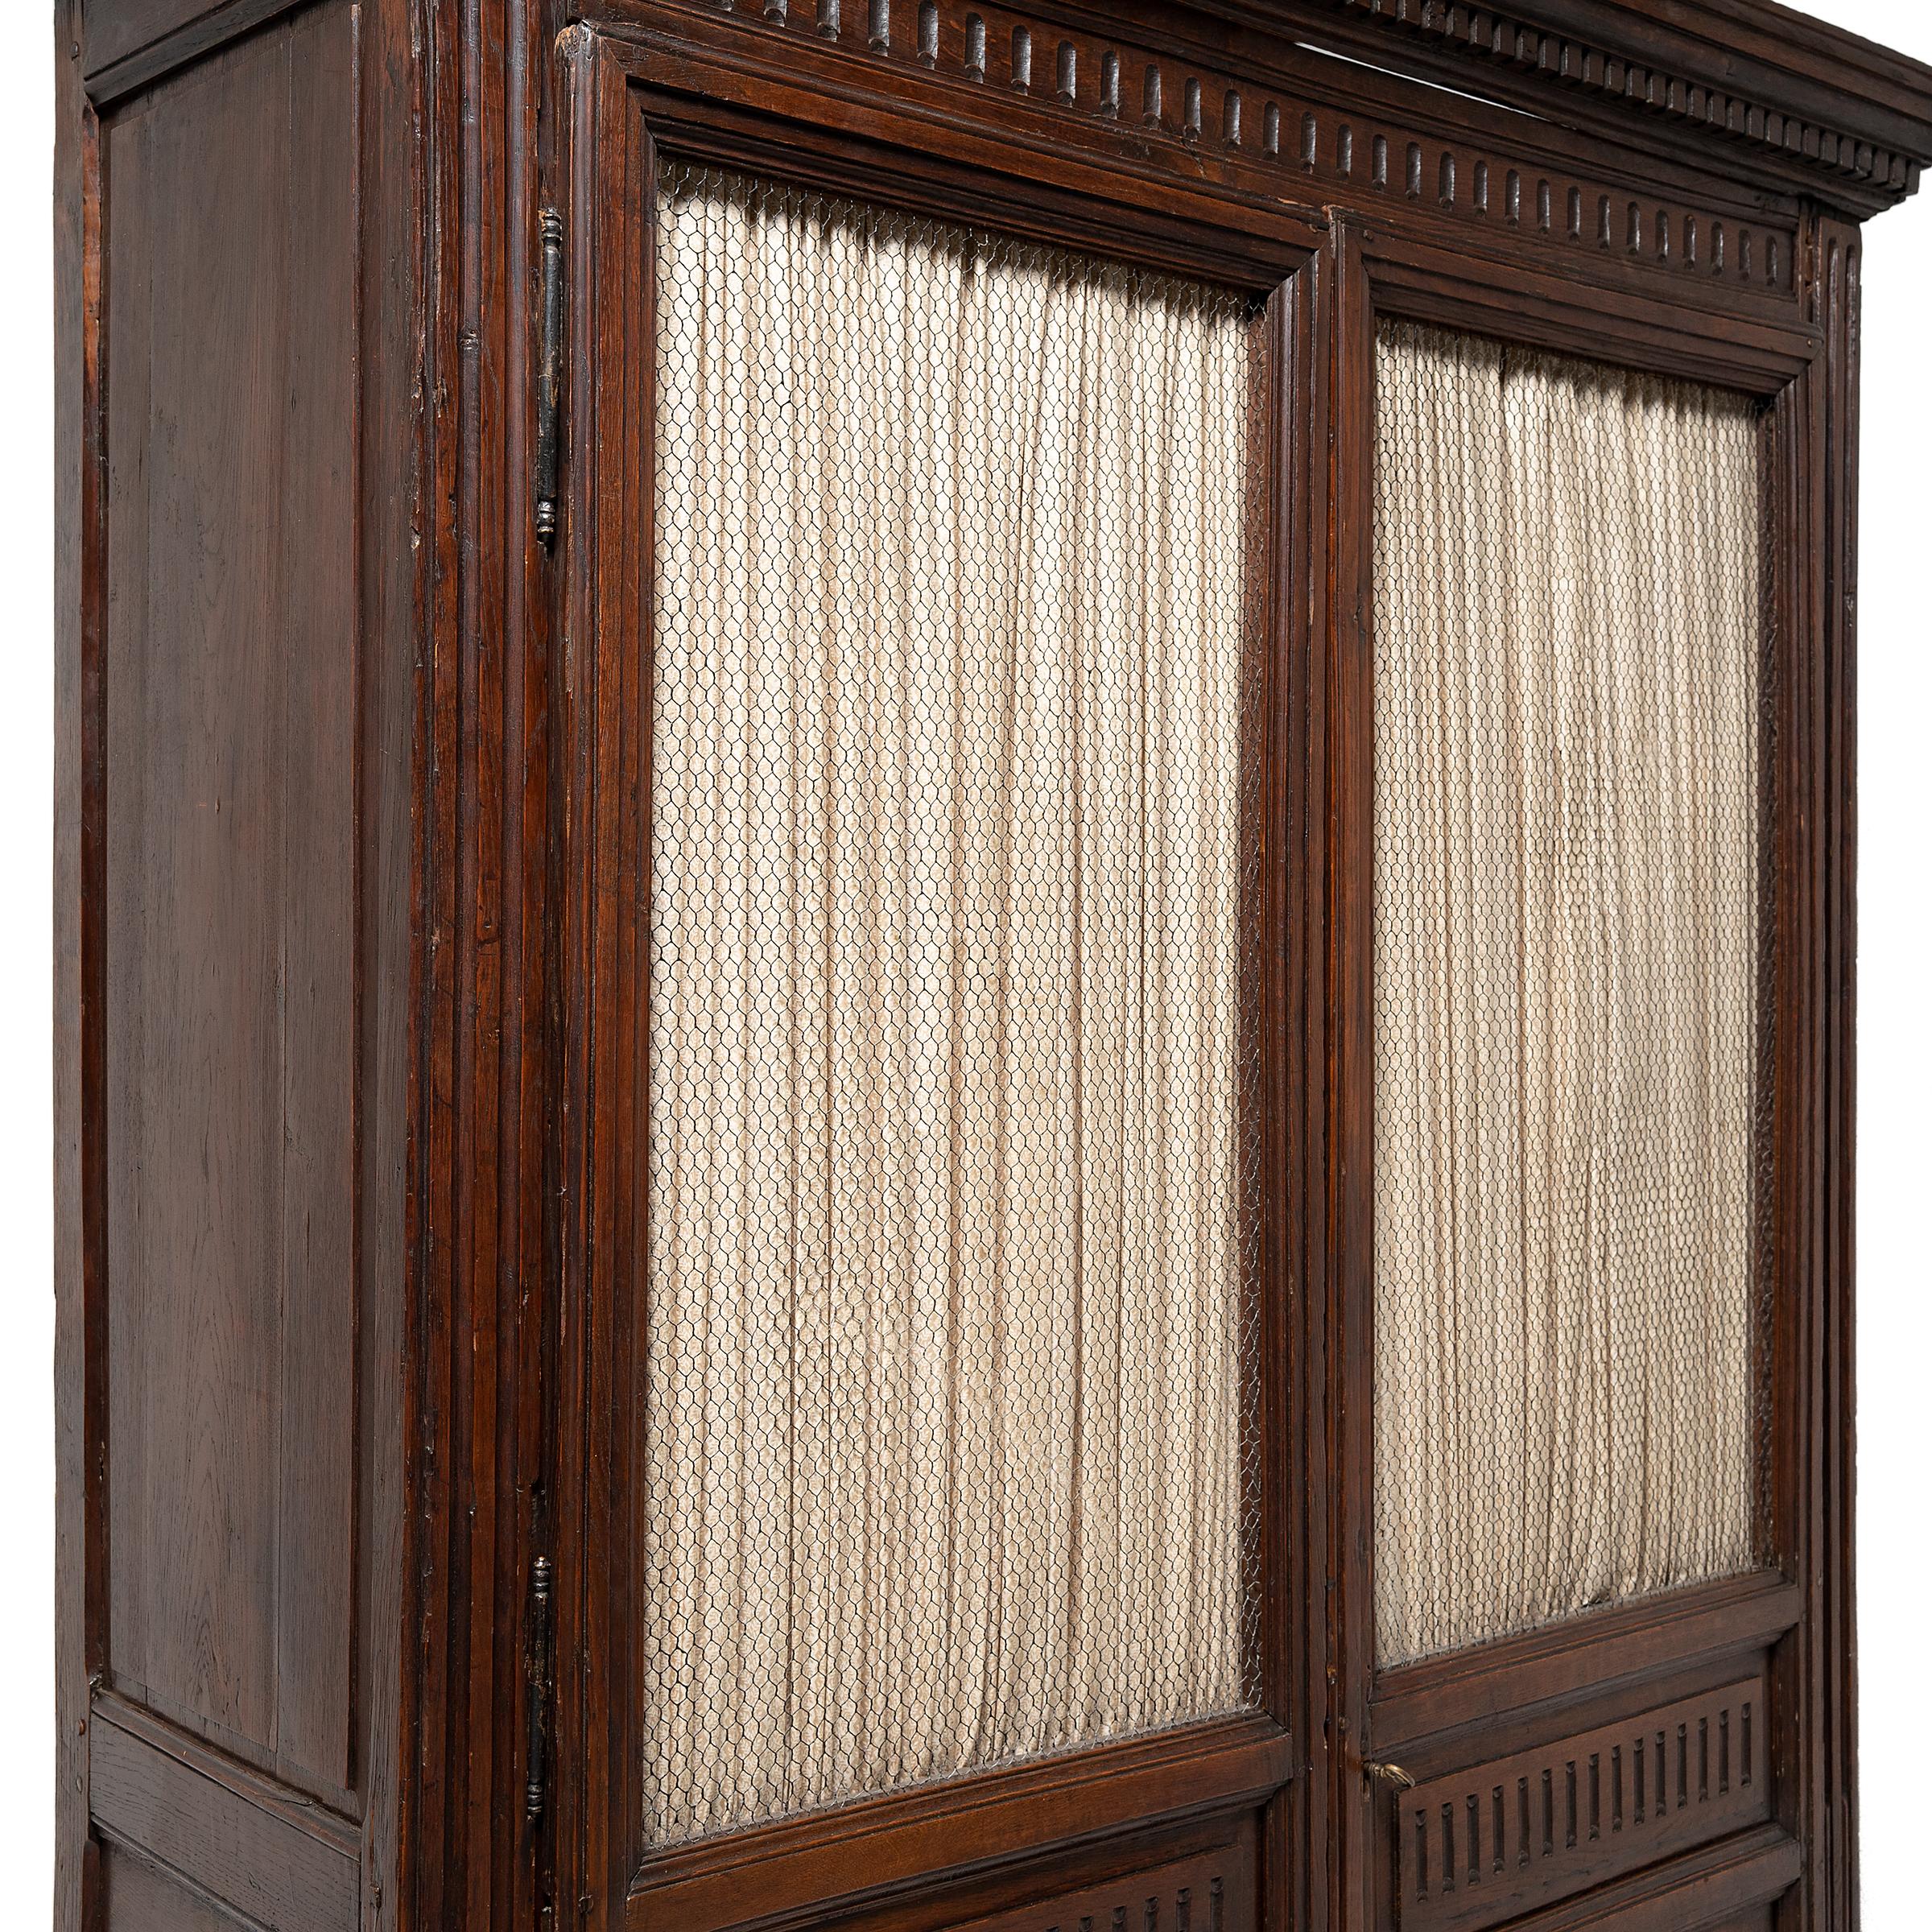 Grand Renaissance Revival Armoire with Wire Screens, circa 1800 For Sale 1